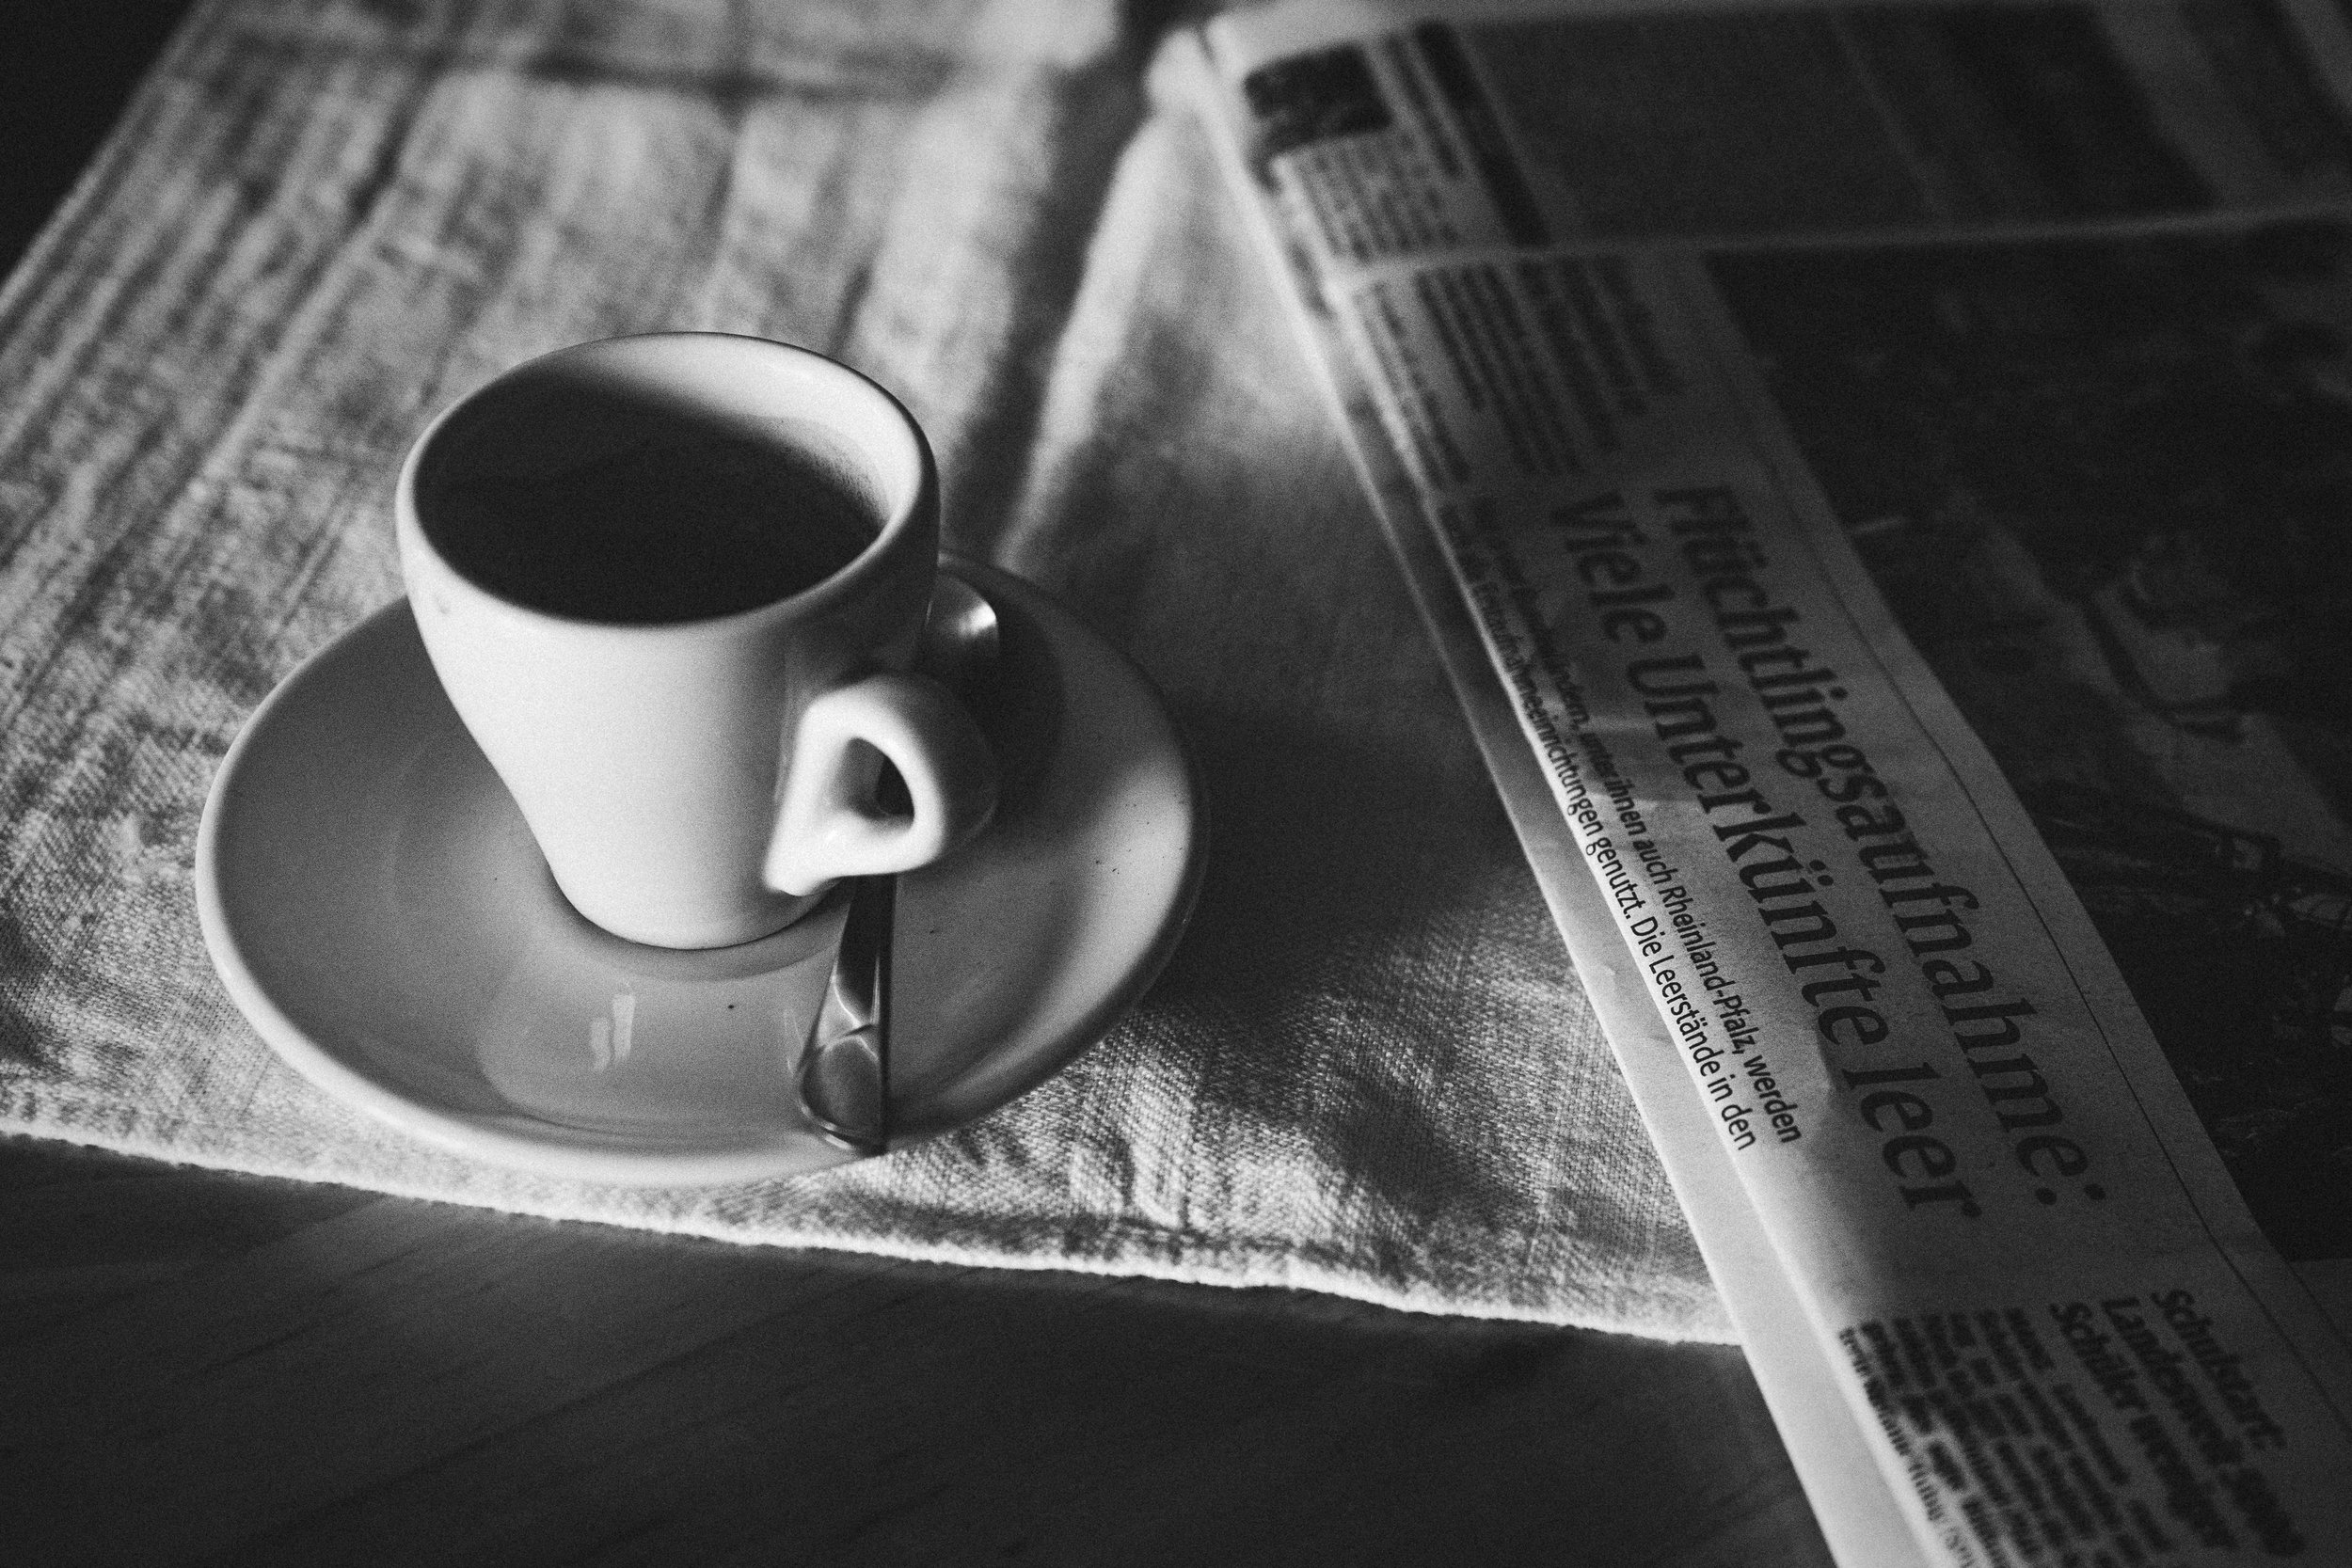 An espresso cup sits on a table next to a folded newspaper